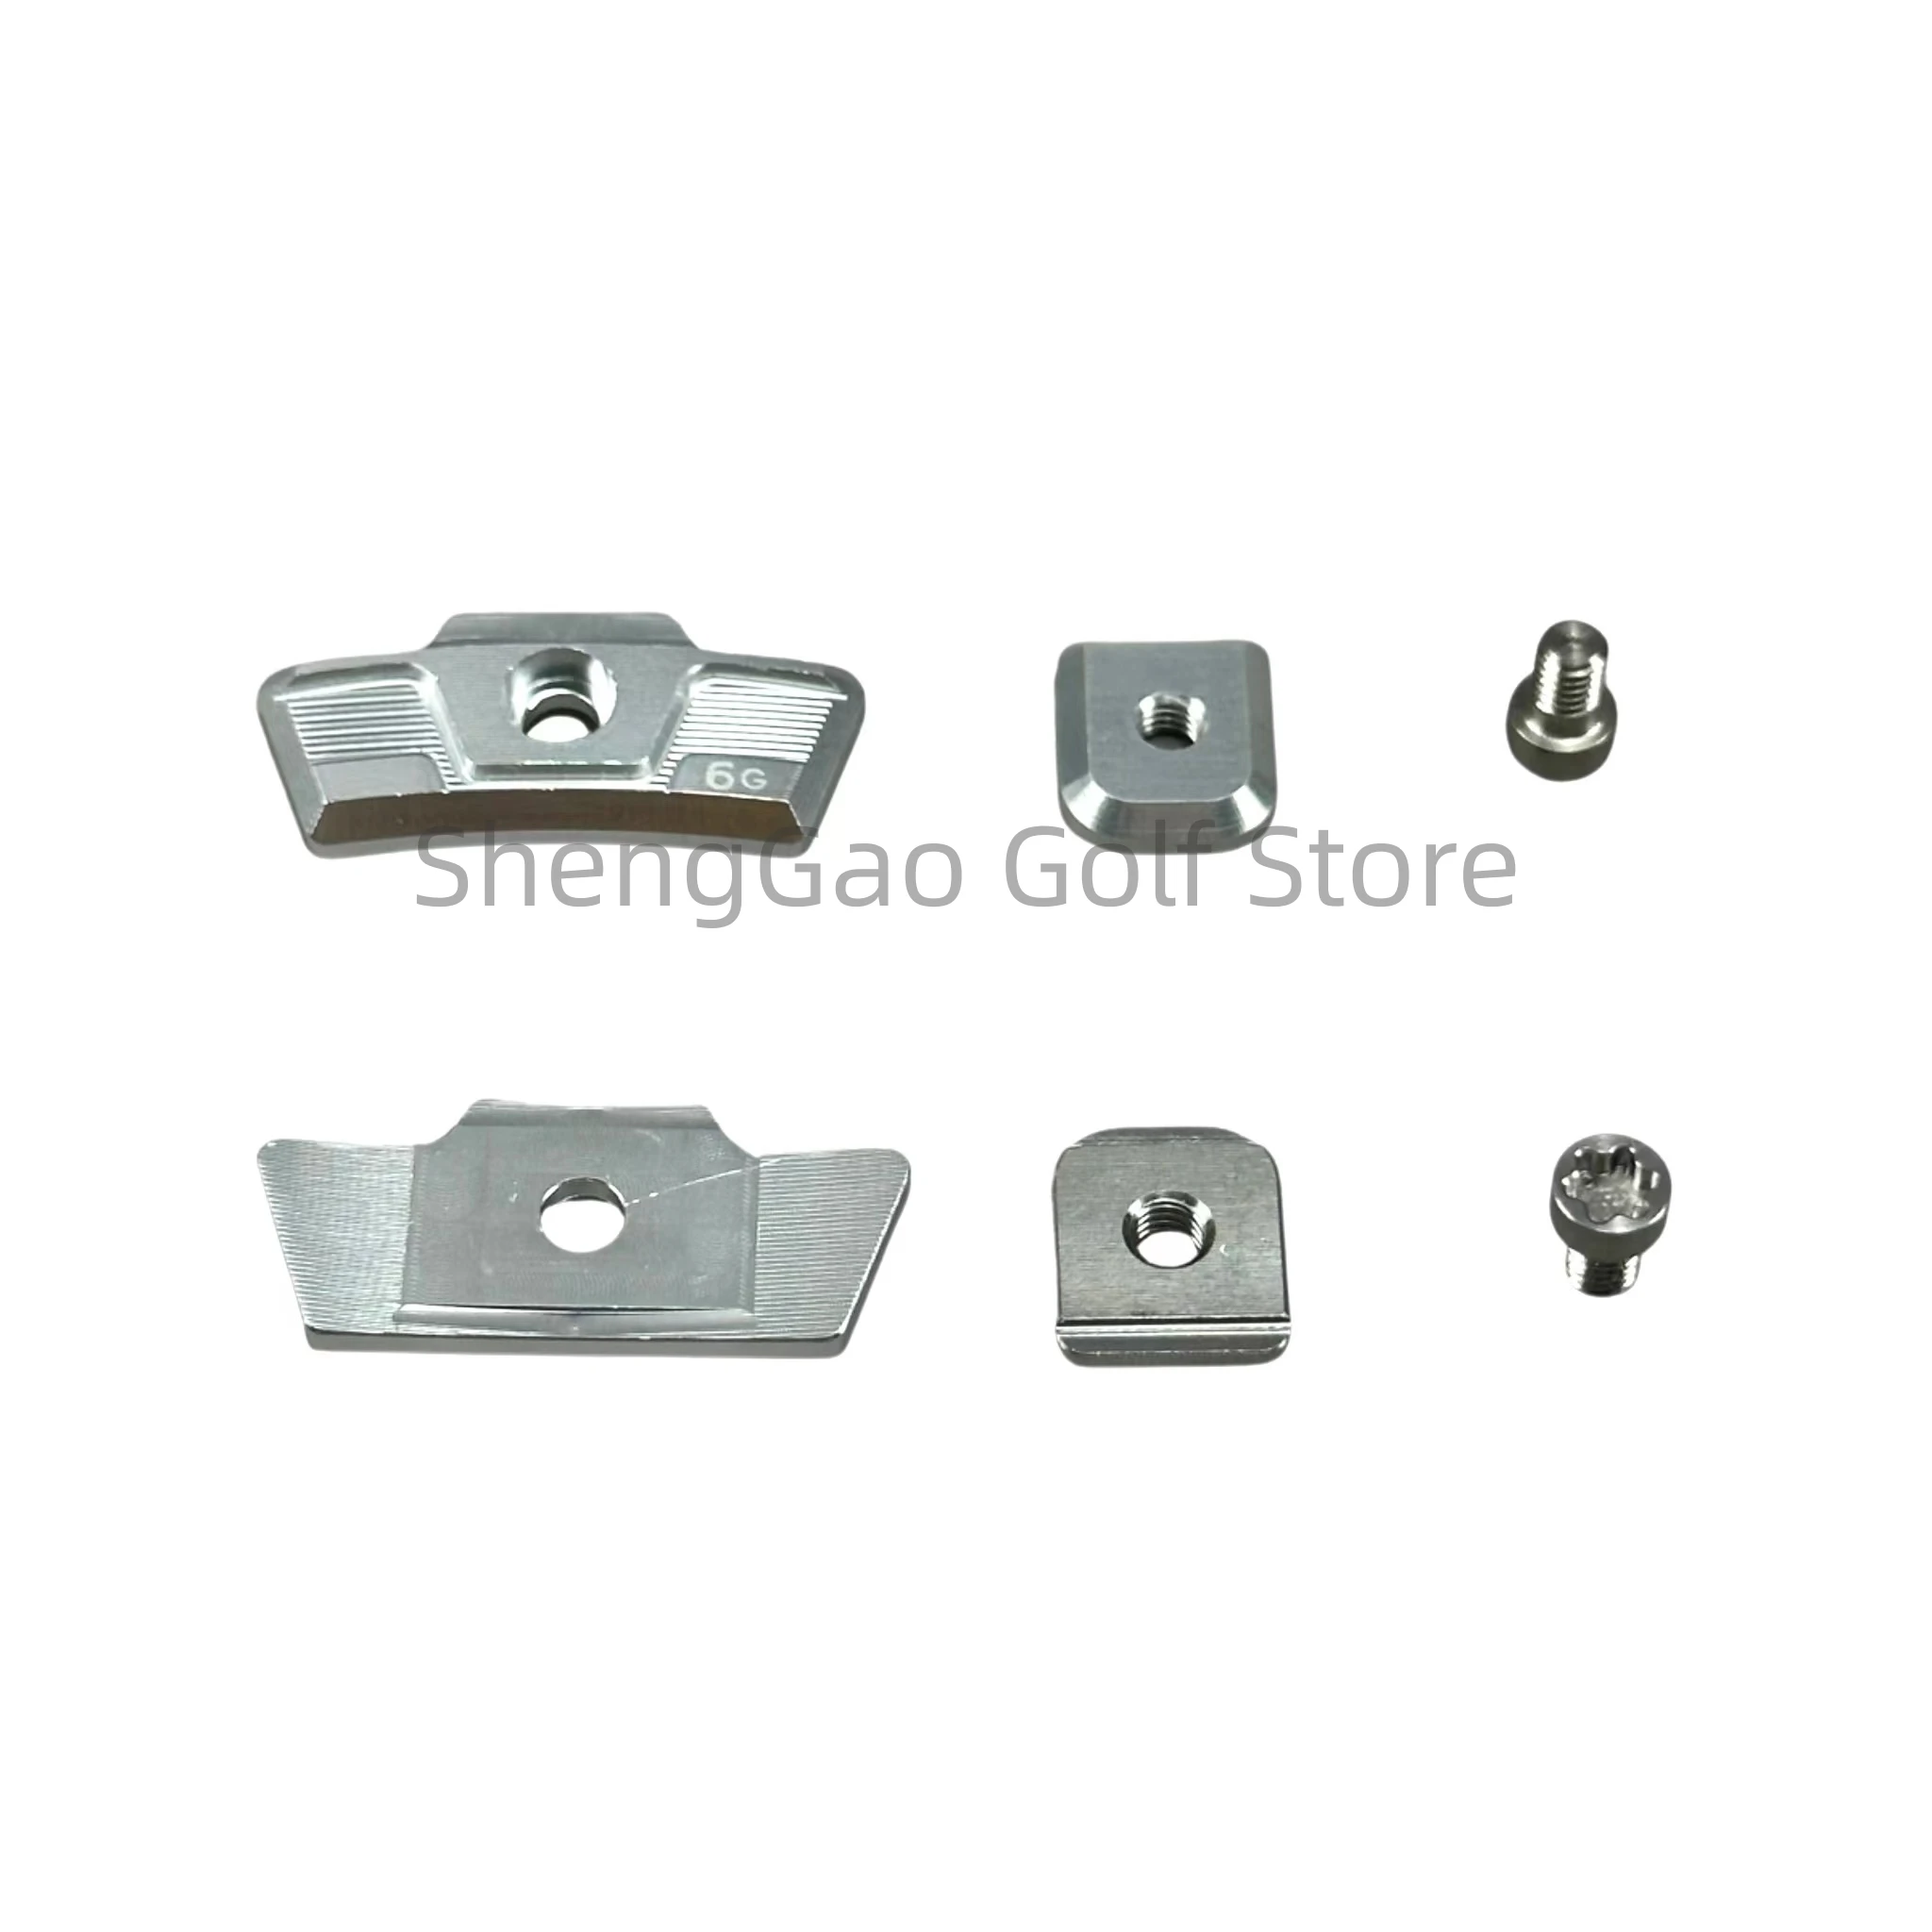 Golf Club Head Slider Weight Compatible with Taylormade Stealth 2 Plus Driver Head Weights 6g 8g 10g 12g 13g 15g Available